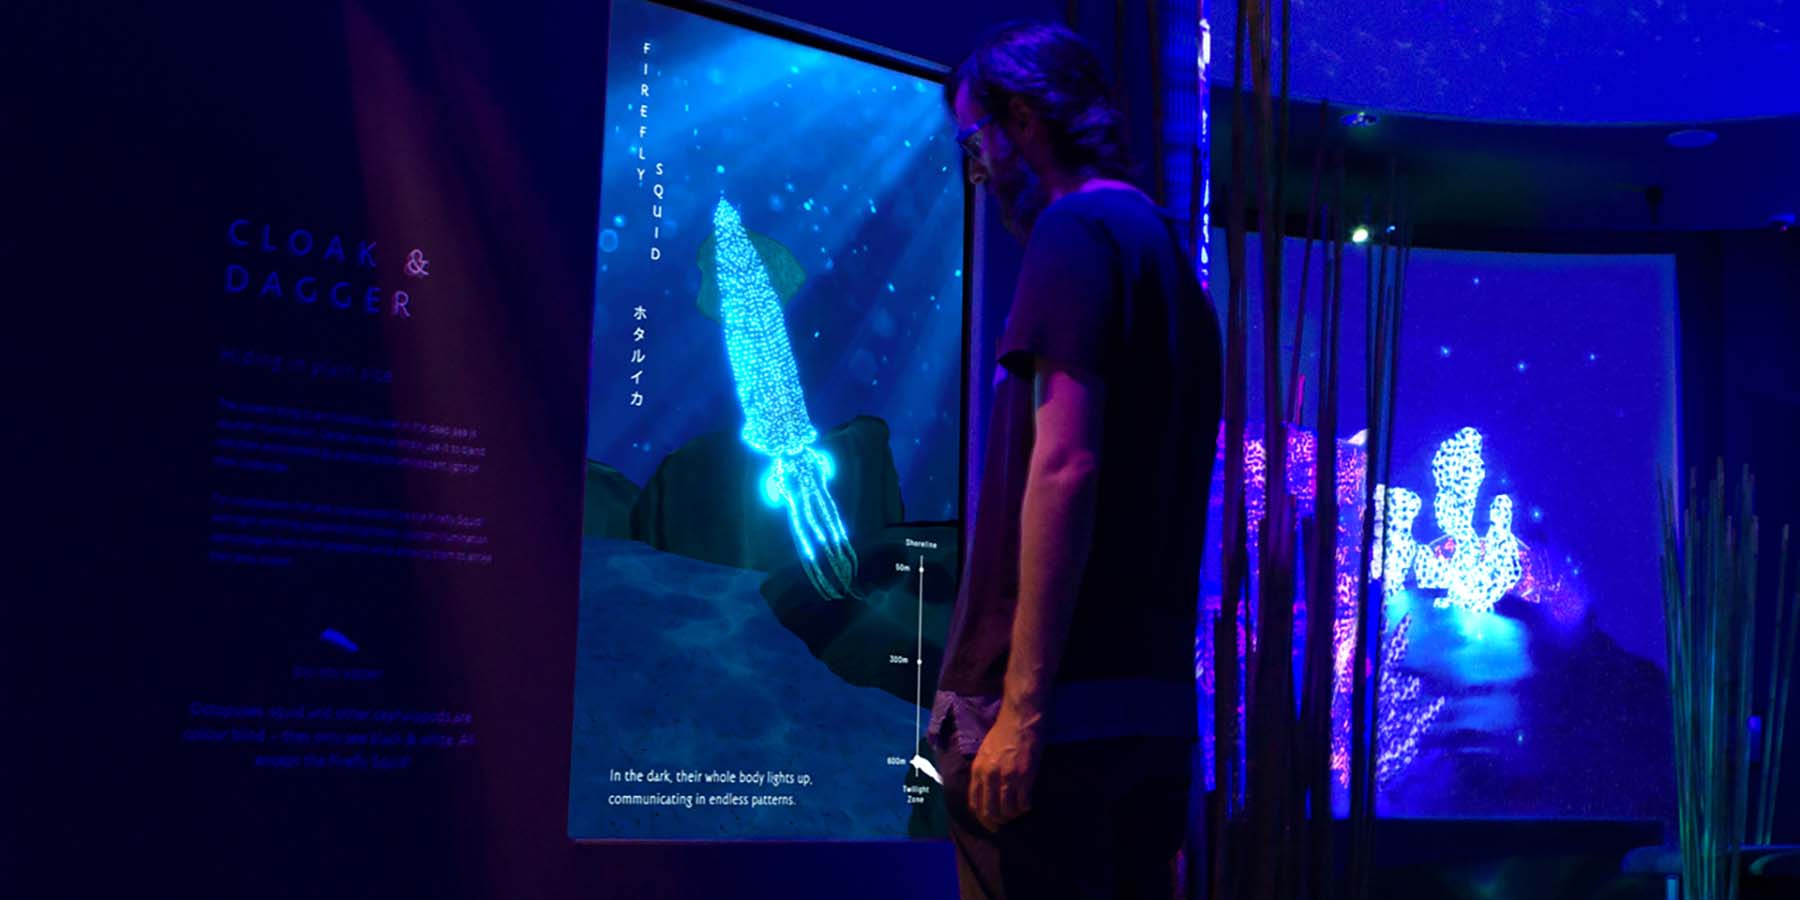 An interactive touchscreen where users take a close look at bioluminescent camouflage.